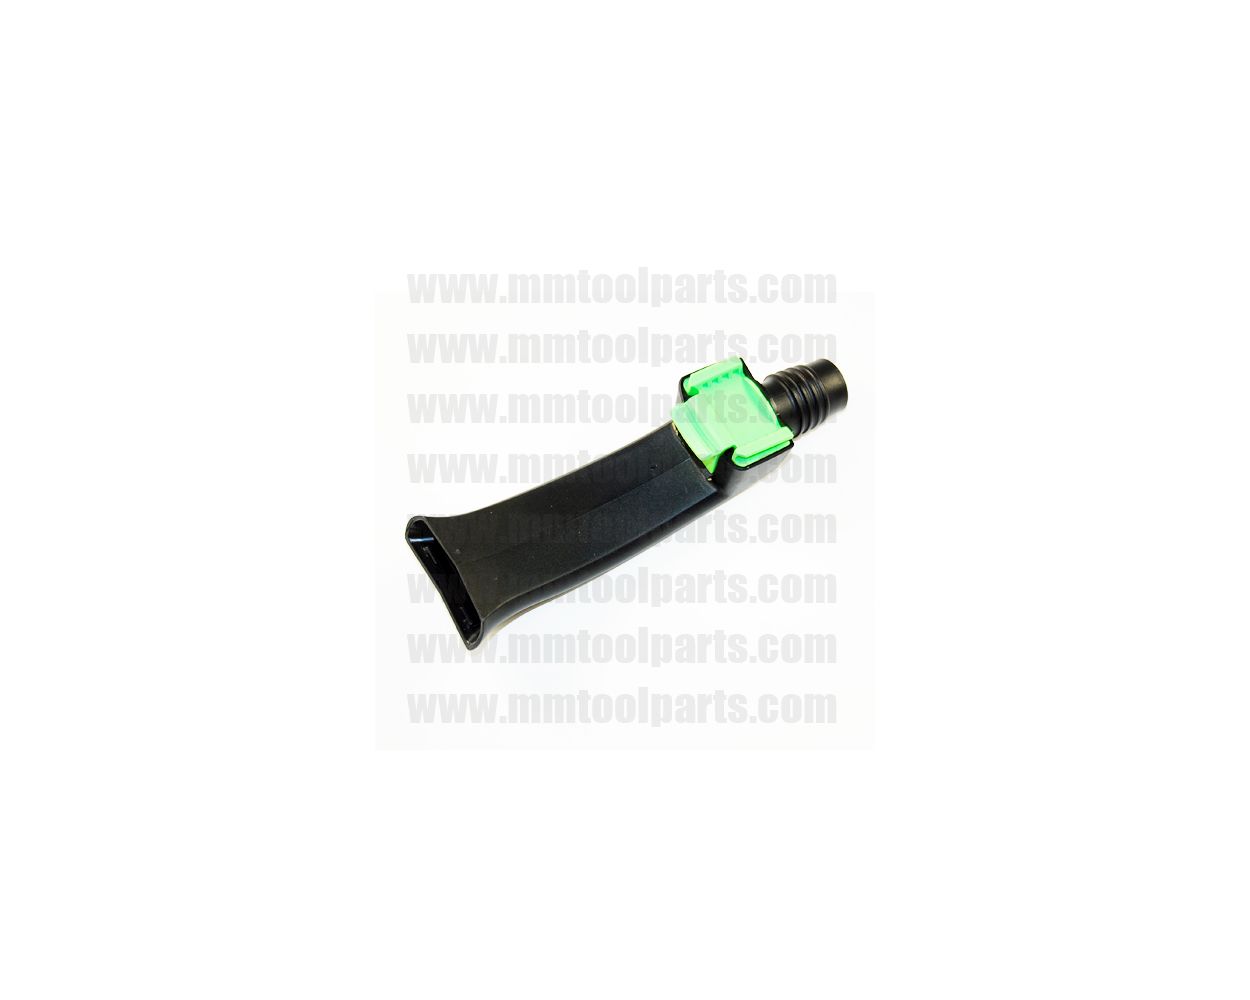 FESTOOL 493039 Extractor Tube Replaces 10025000 For RO150FEQ Sander 